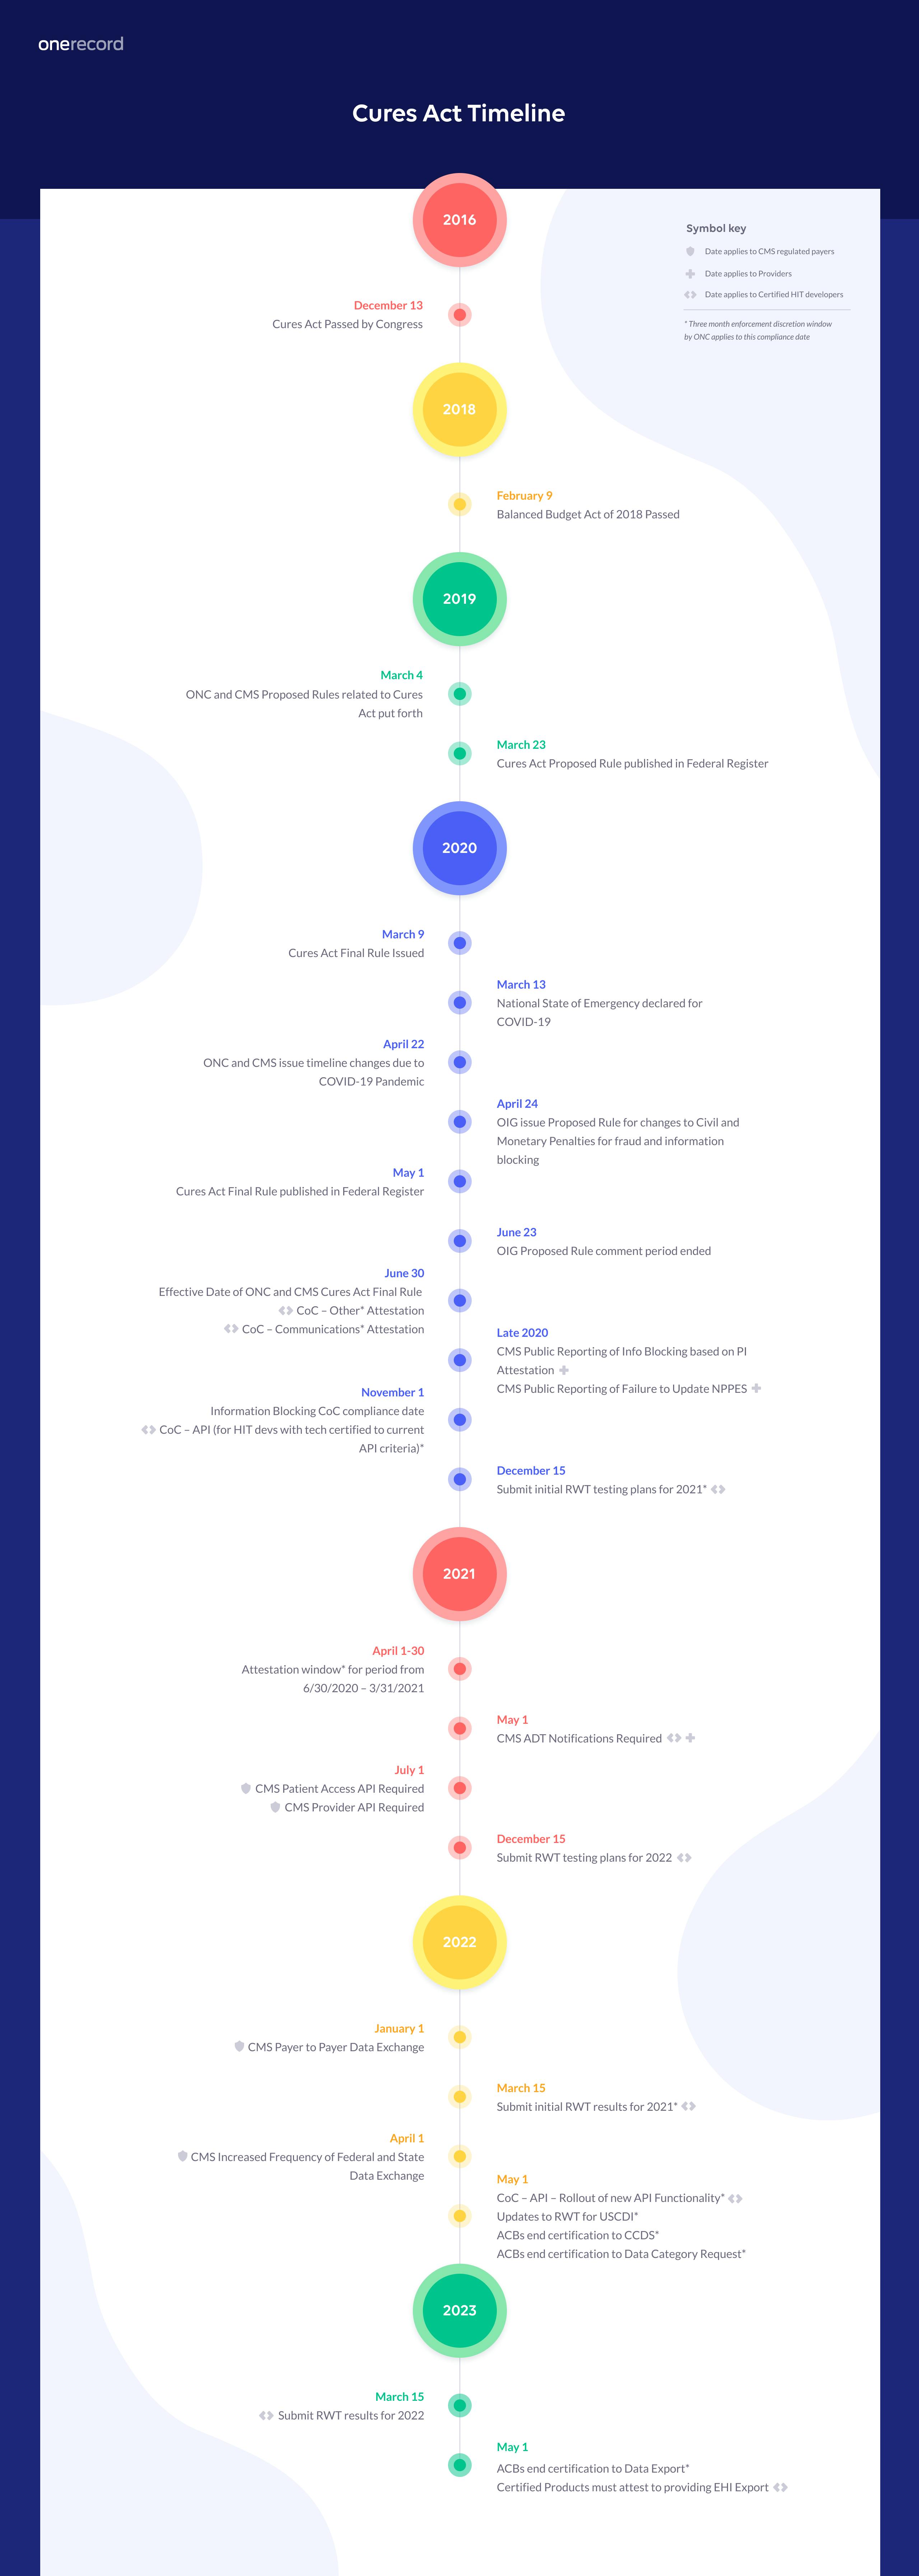 Cures Act Timeline